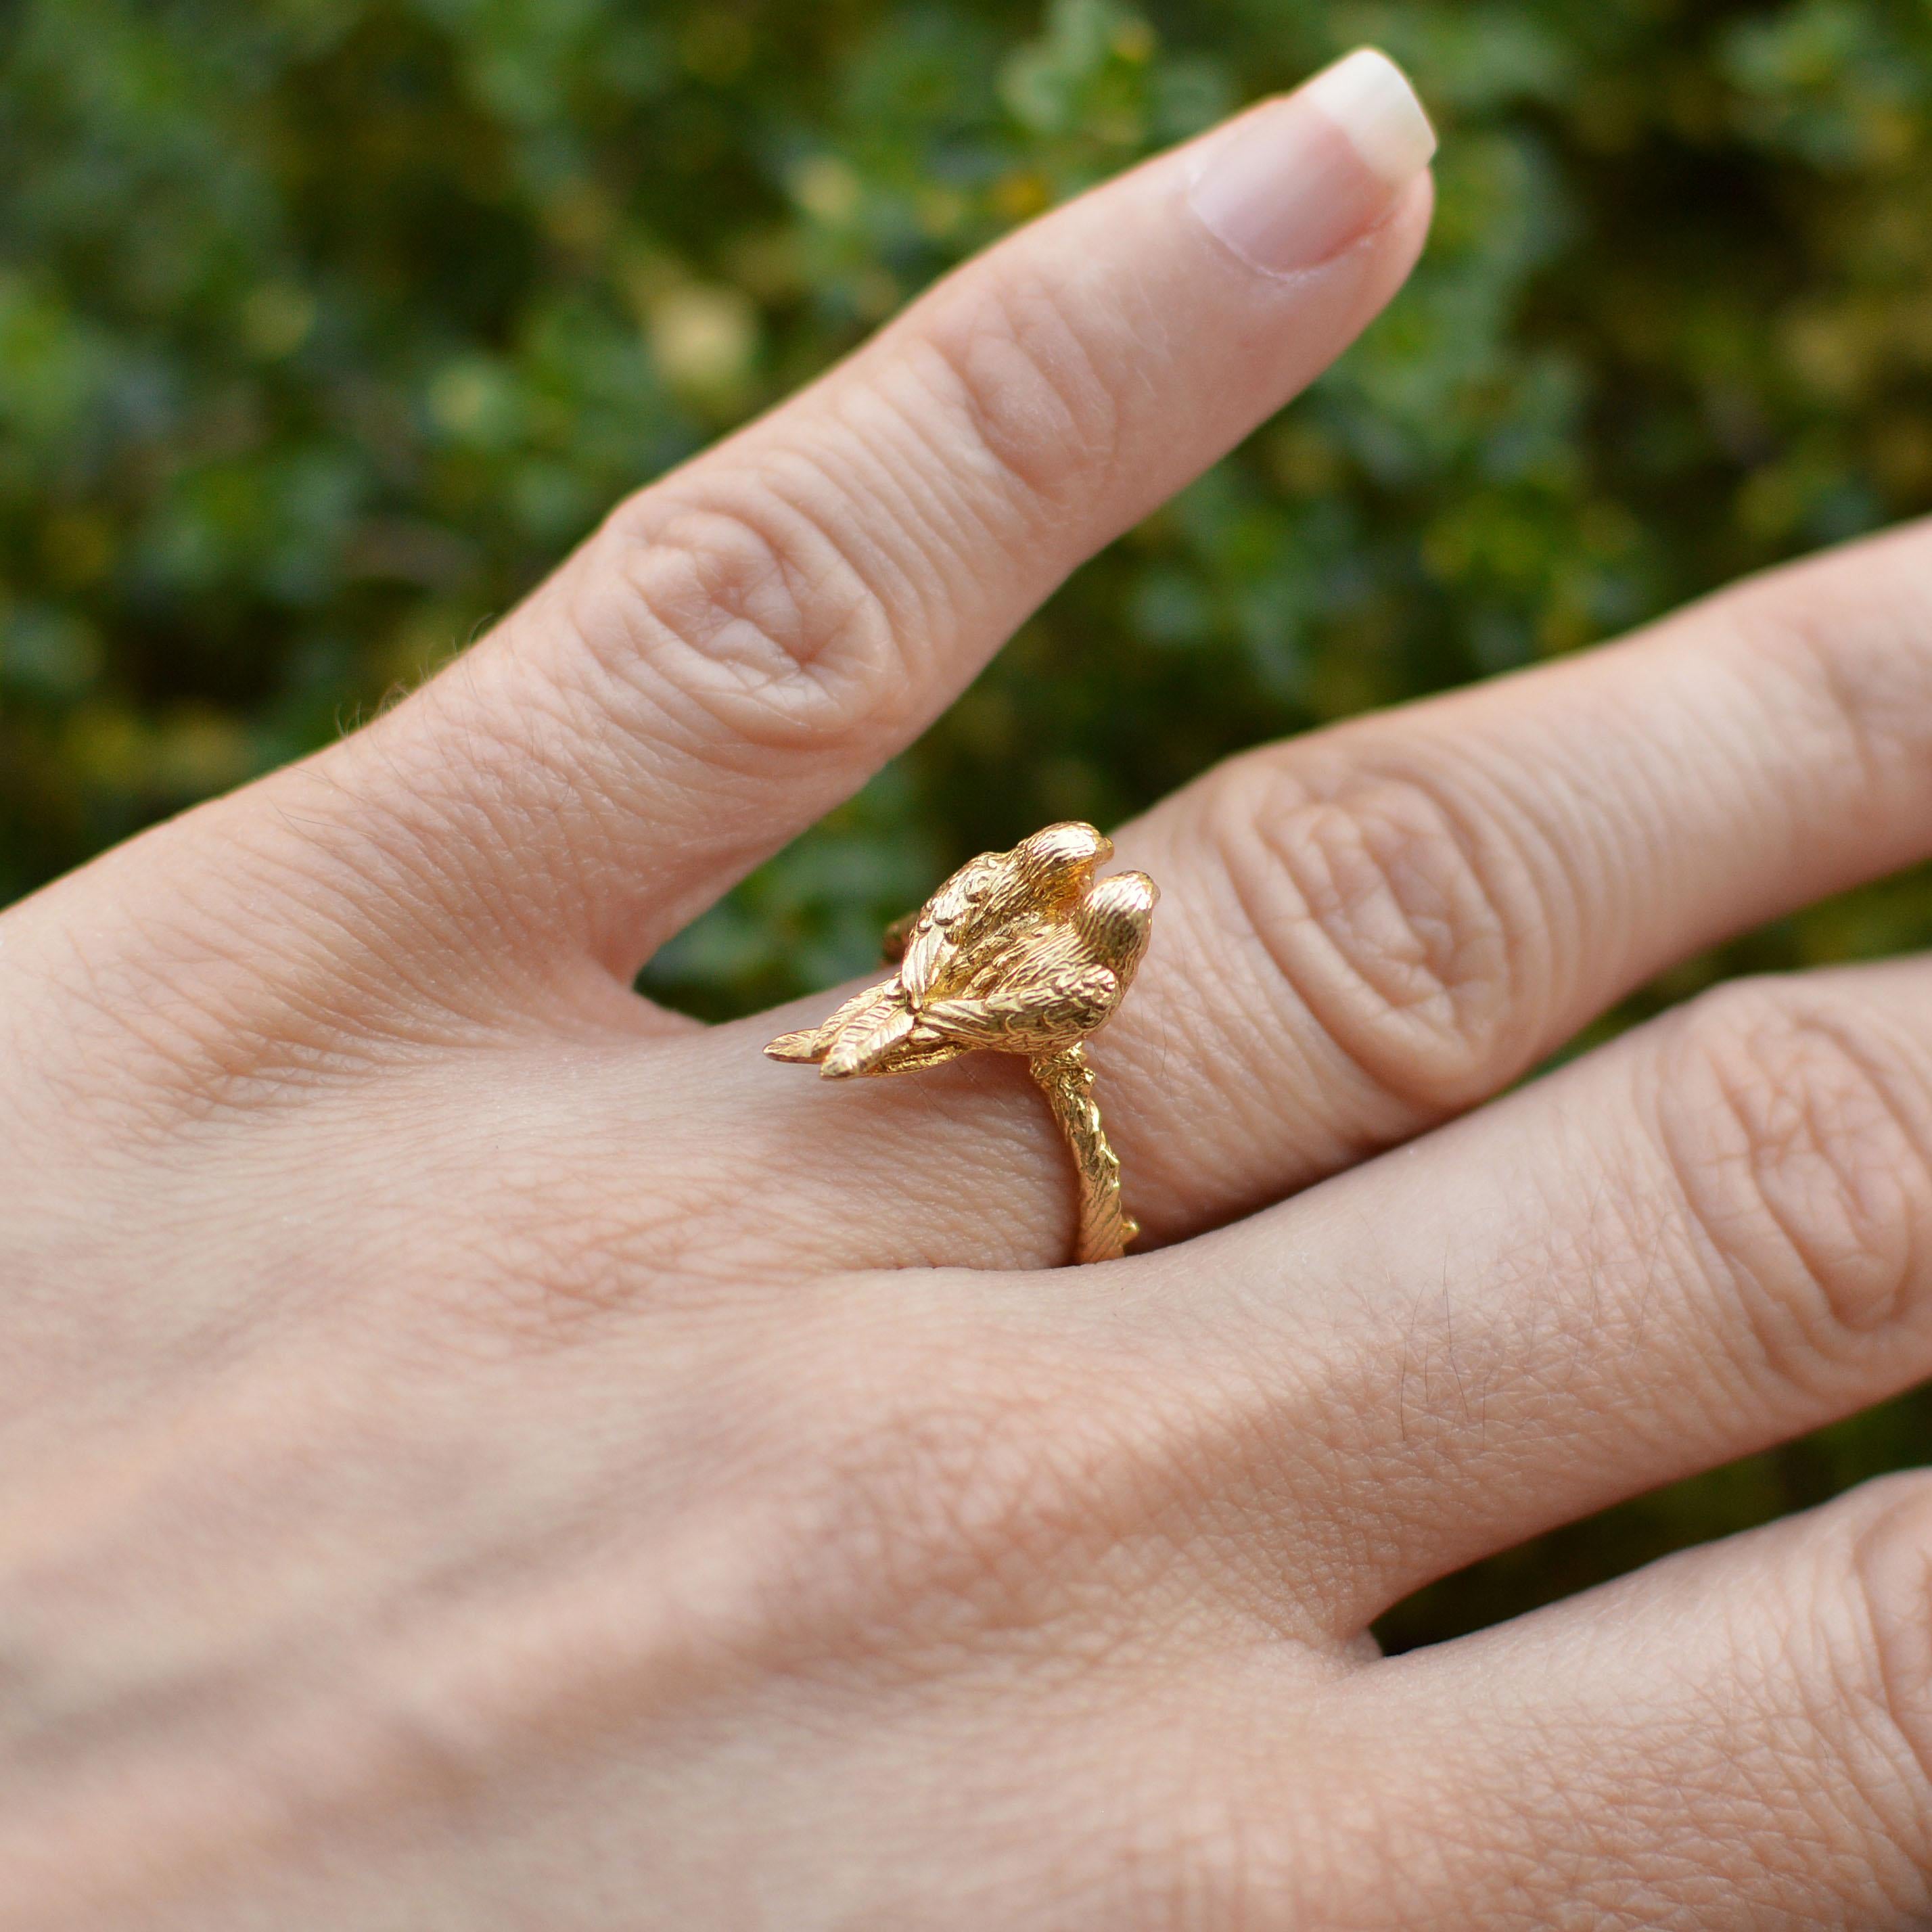 This is a delicate little ring with a branch textured band and two cuddling conure parrots perched on top. This ring is cast in solid 18 Carat gold and finished by hand, and created from Lucy's original hand-sculpted design. 

This piece is made in